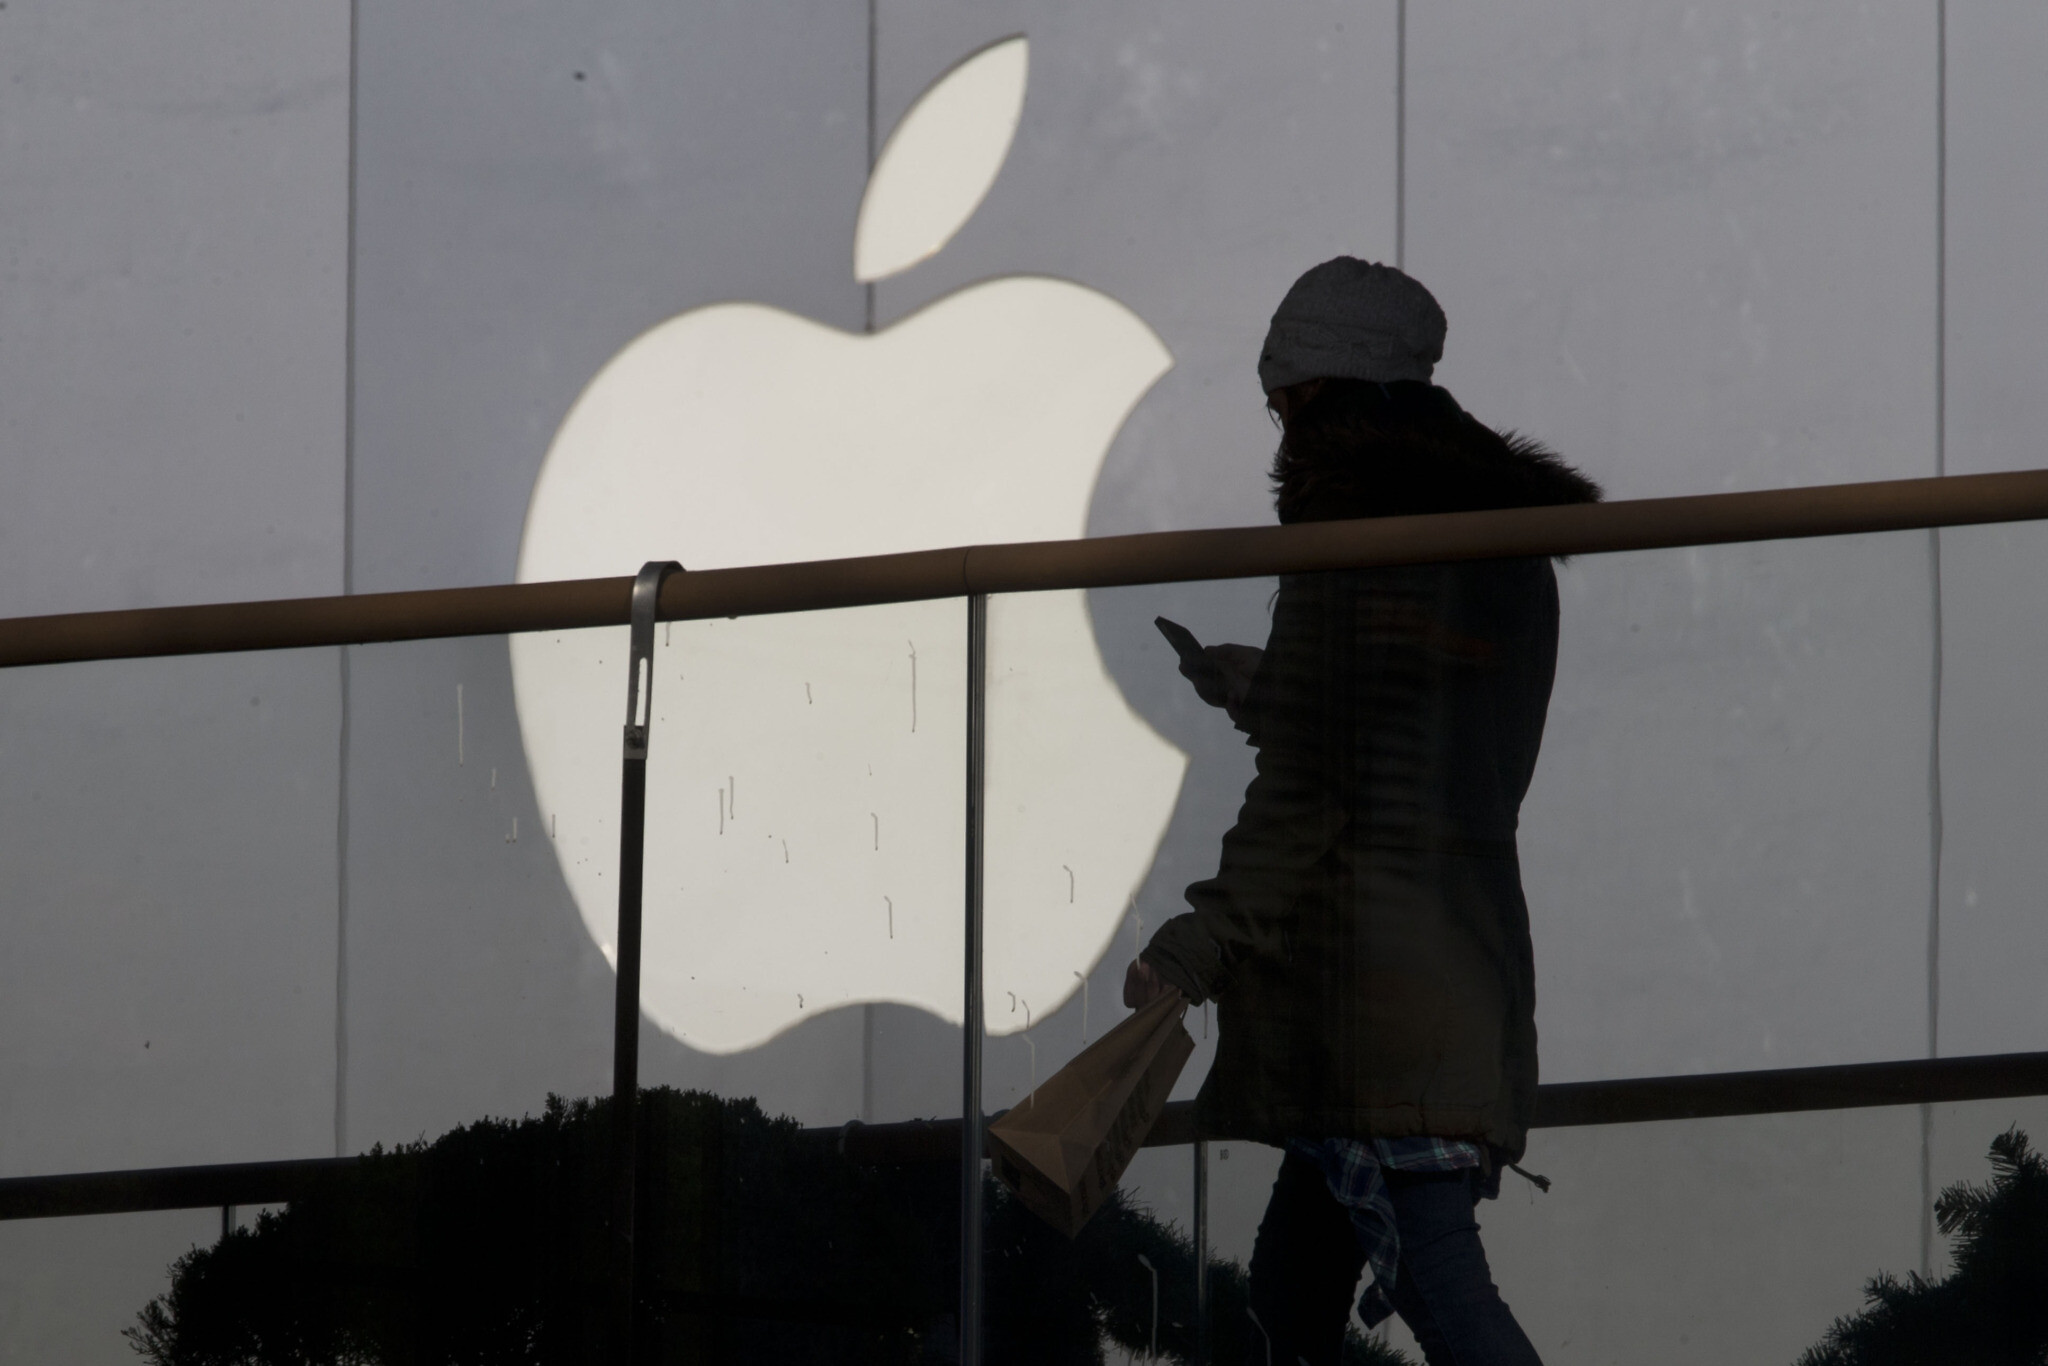 Apple Sues Israeli Firm NSO Over Spyware, Claiming iPhone Hacks - WSJ